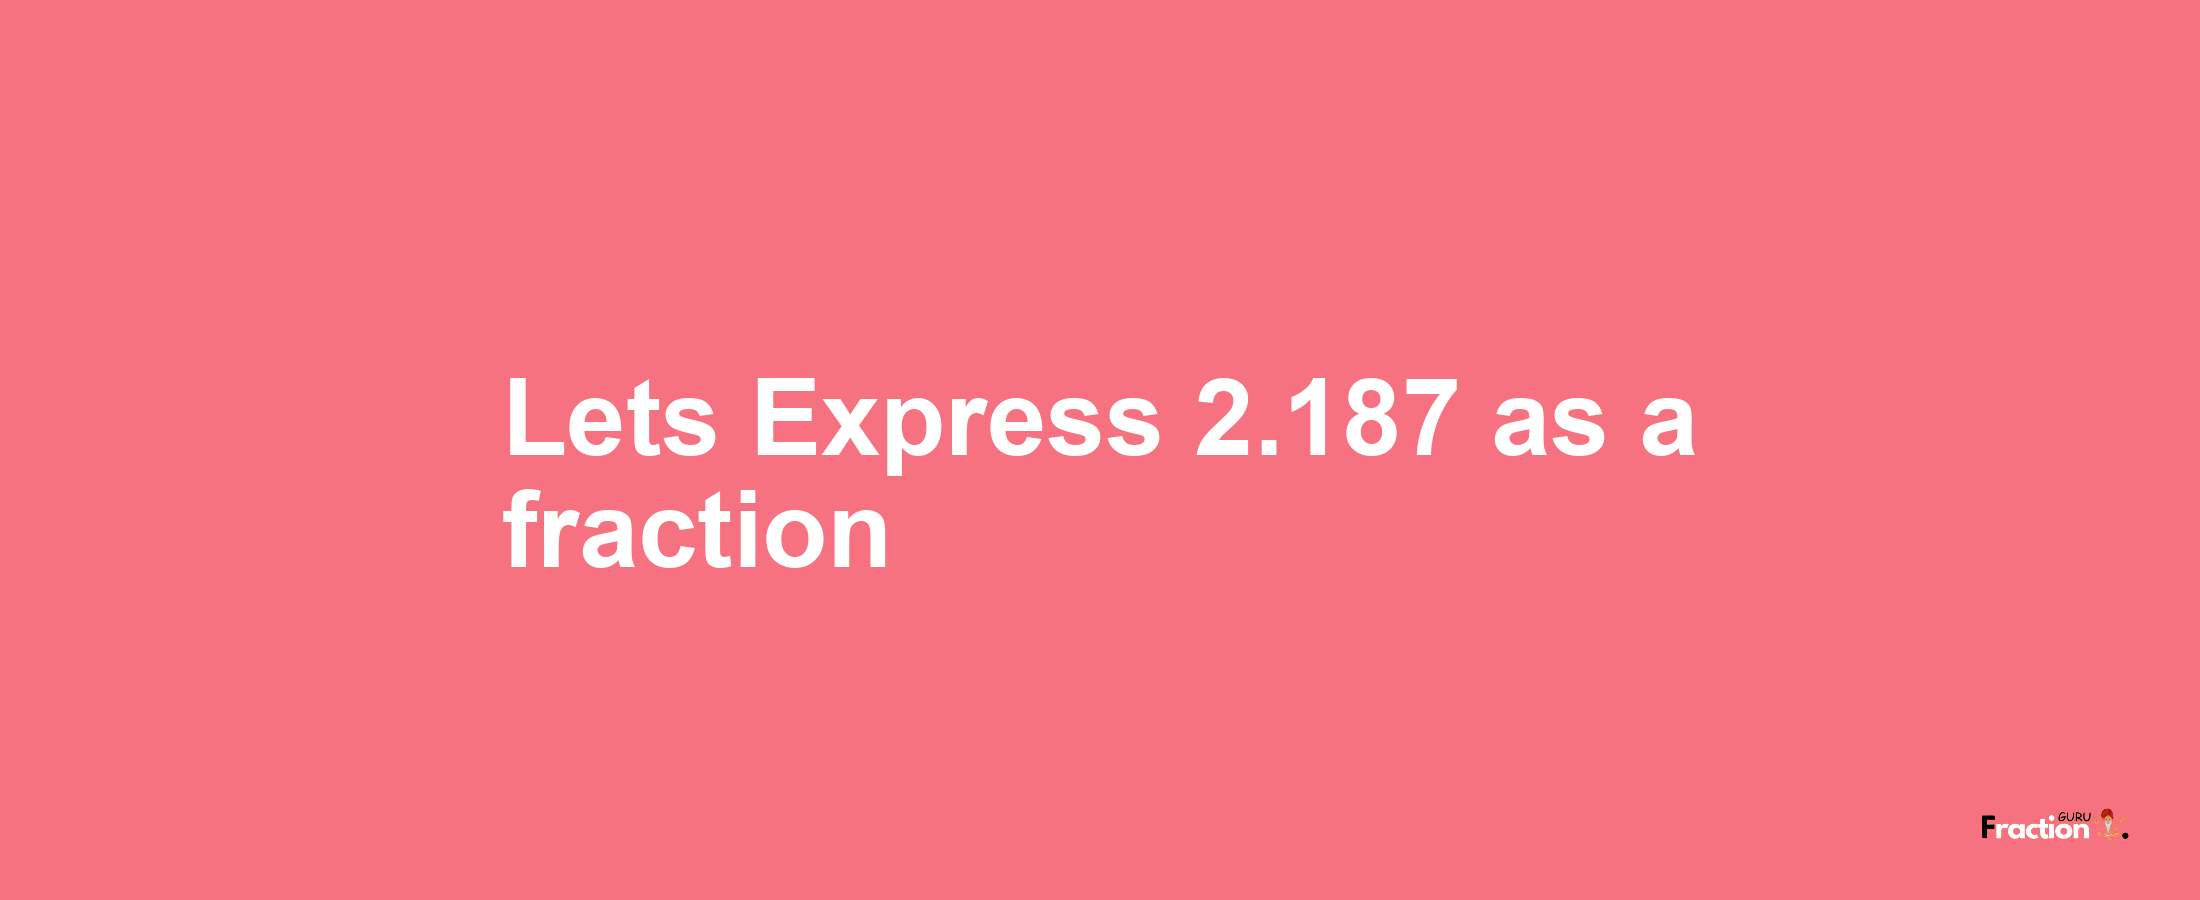 Lets Express 2.187 as afraction